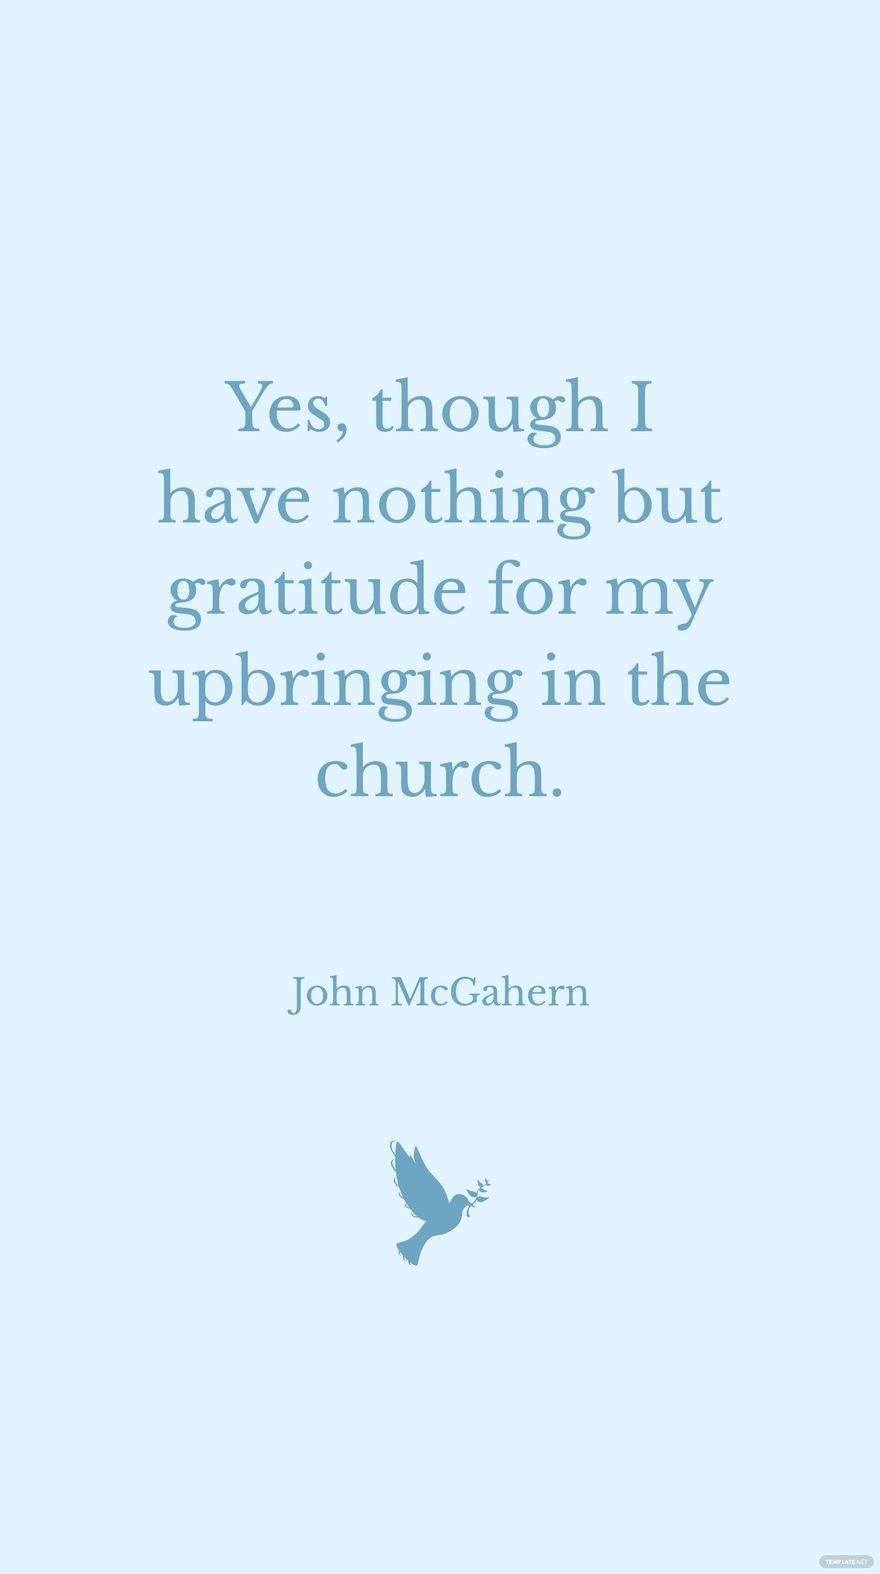 Free John McGahern - Yes, though I have nothing but gratitude for my upbringing in the church. in JPG